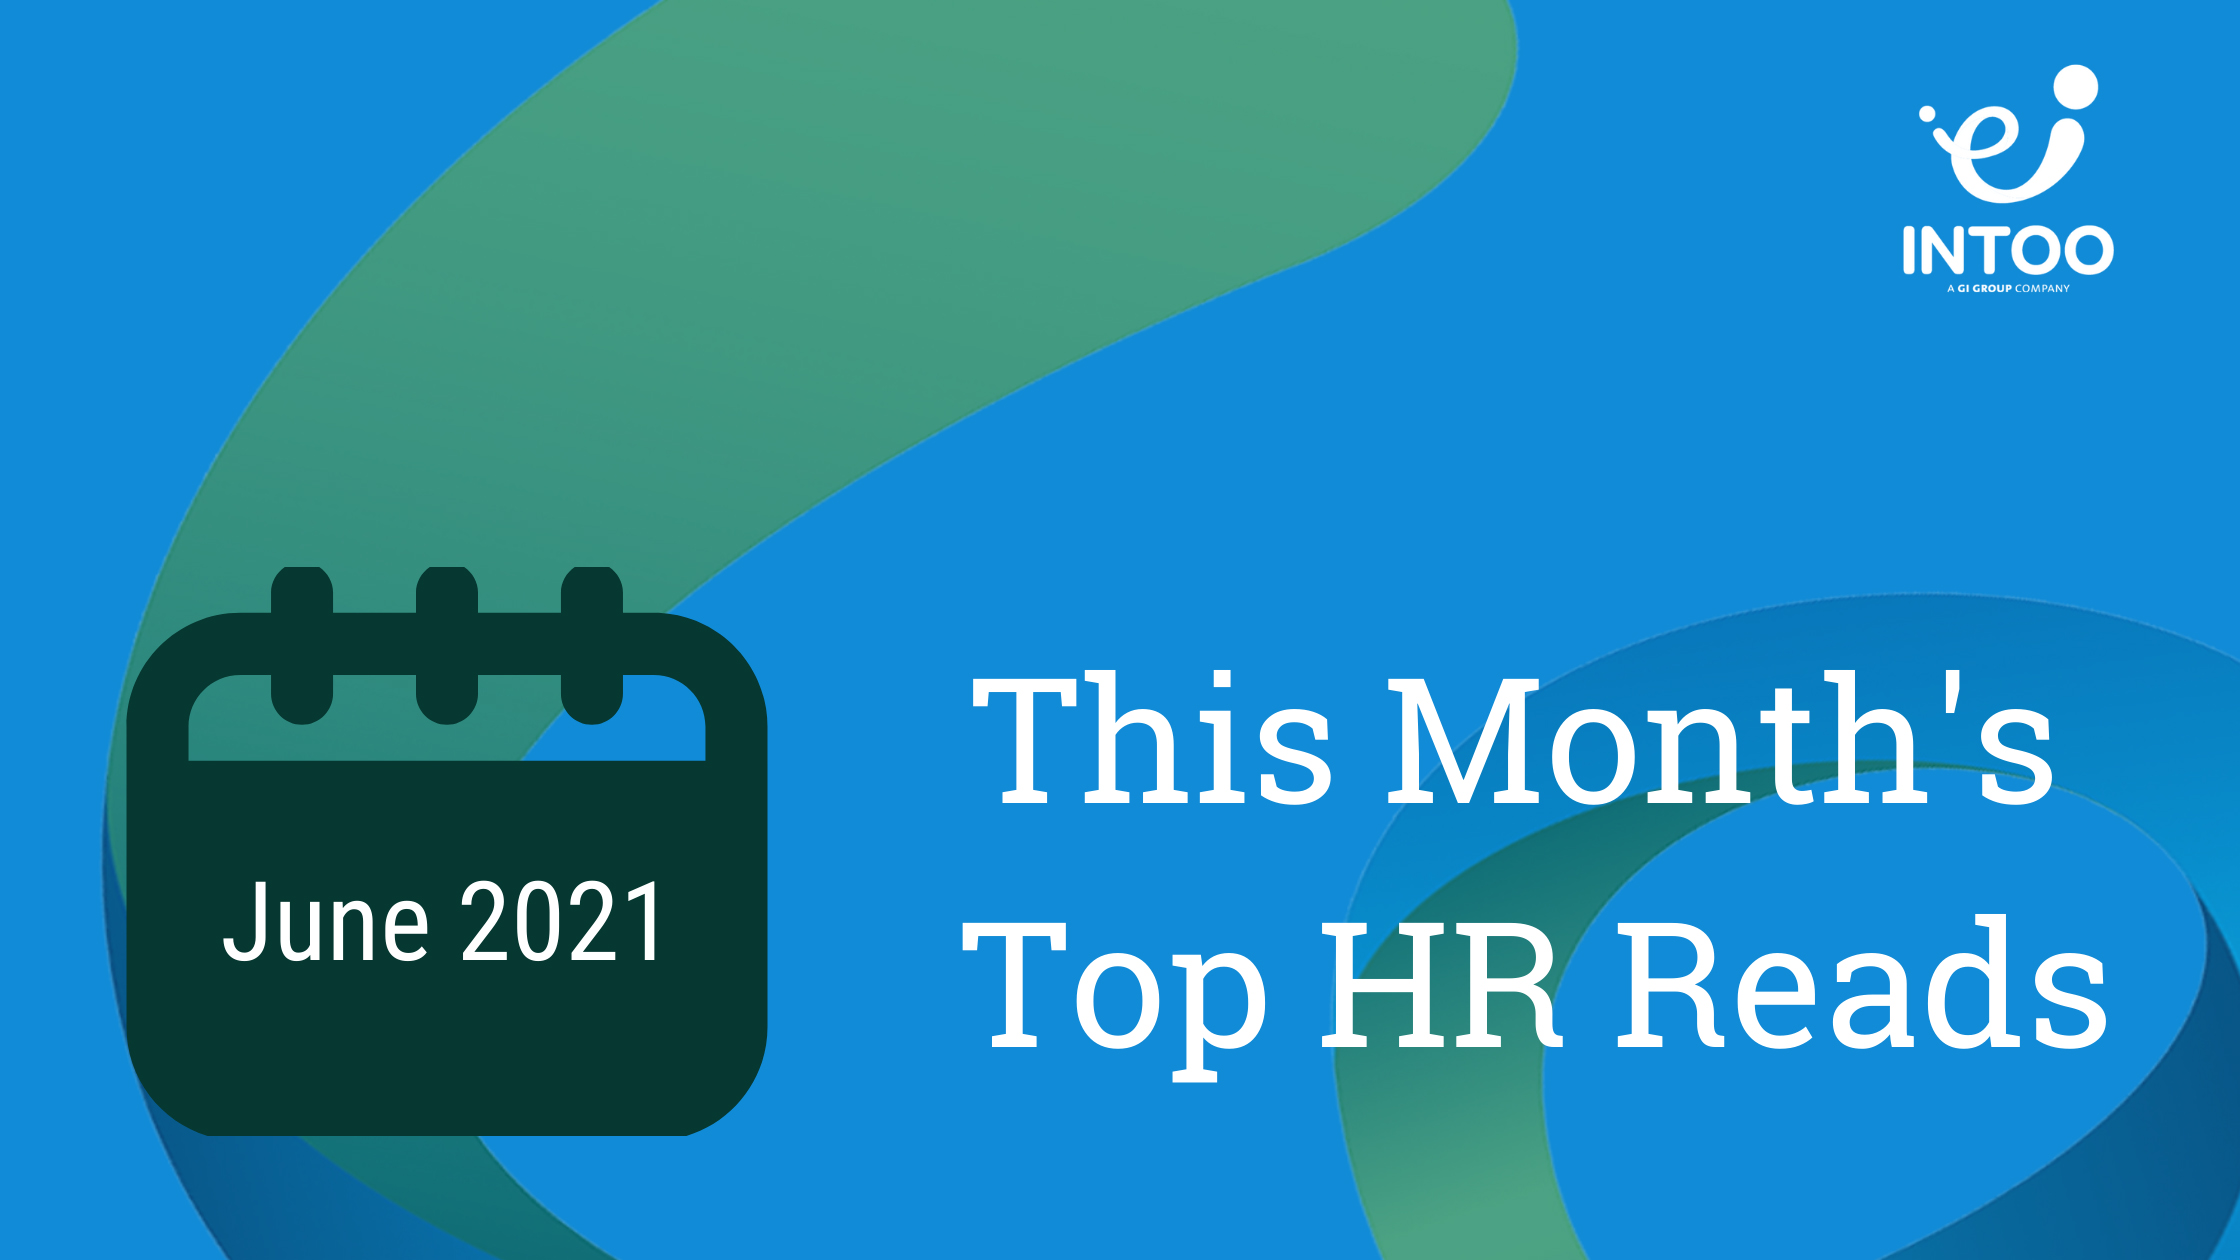 This Month's Top HR Reads for June 2021